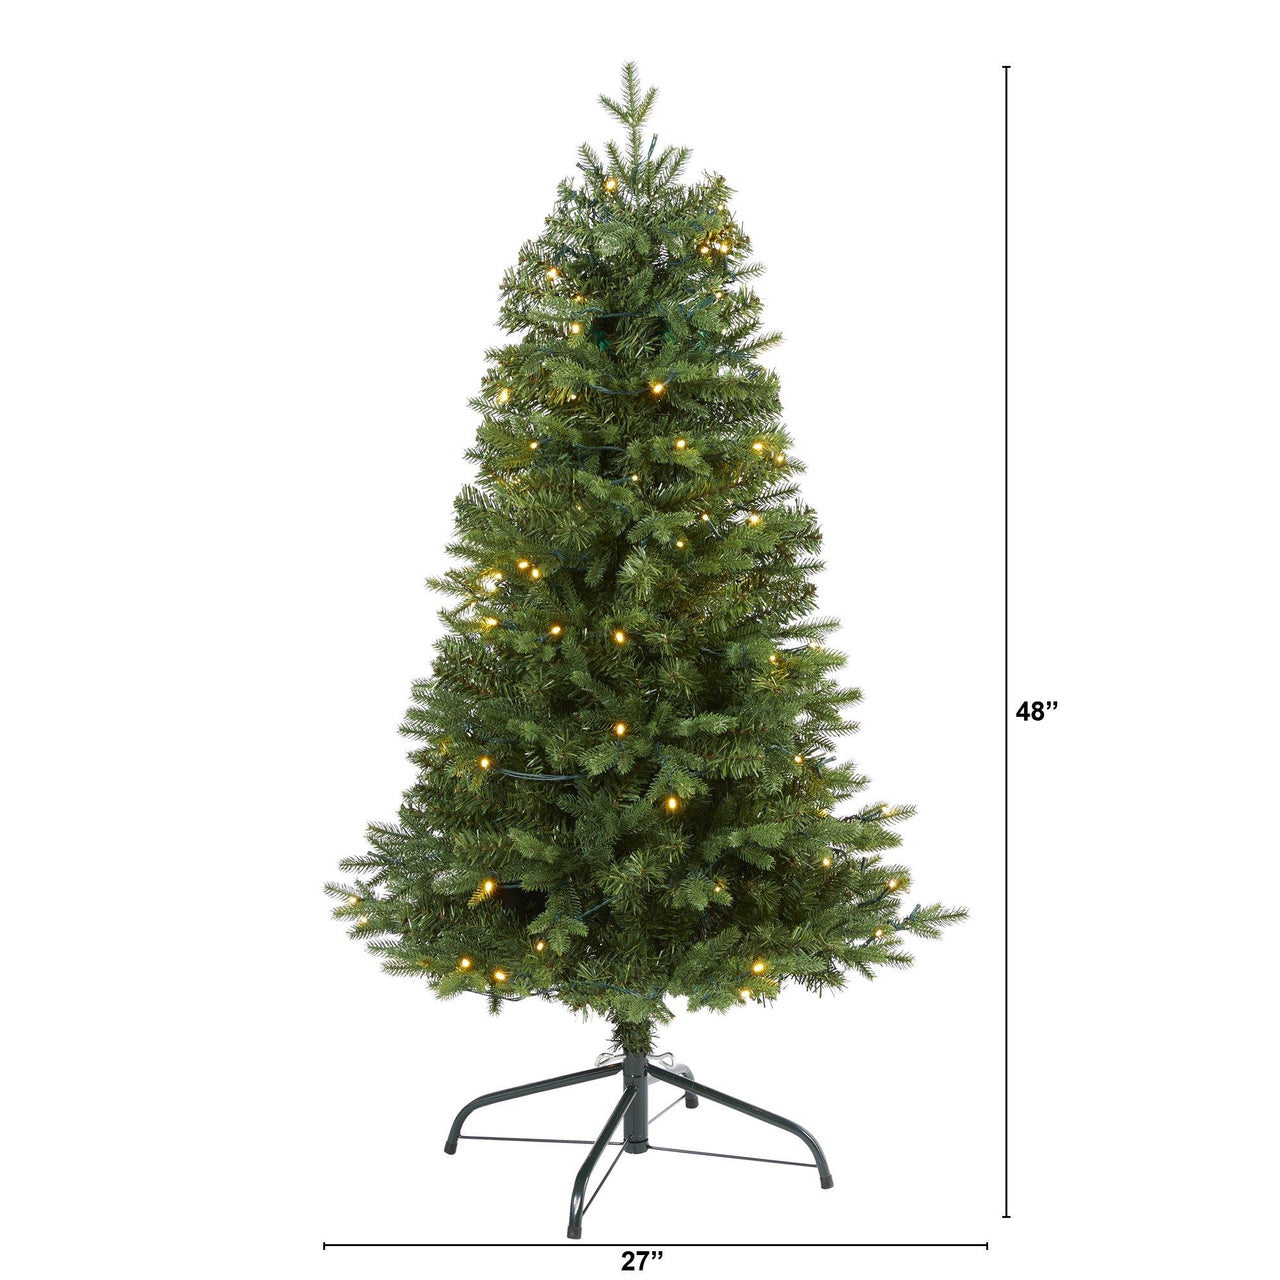 4' Vermont Fir Artificial Christmas Tree with 100 Clear LED Lights - The Fox Decor